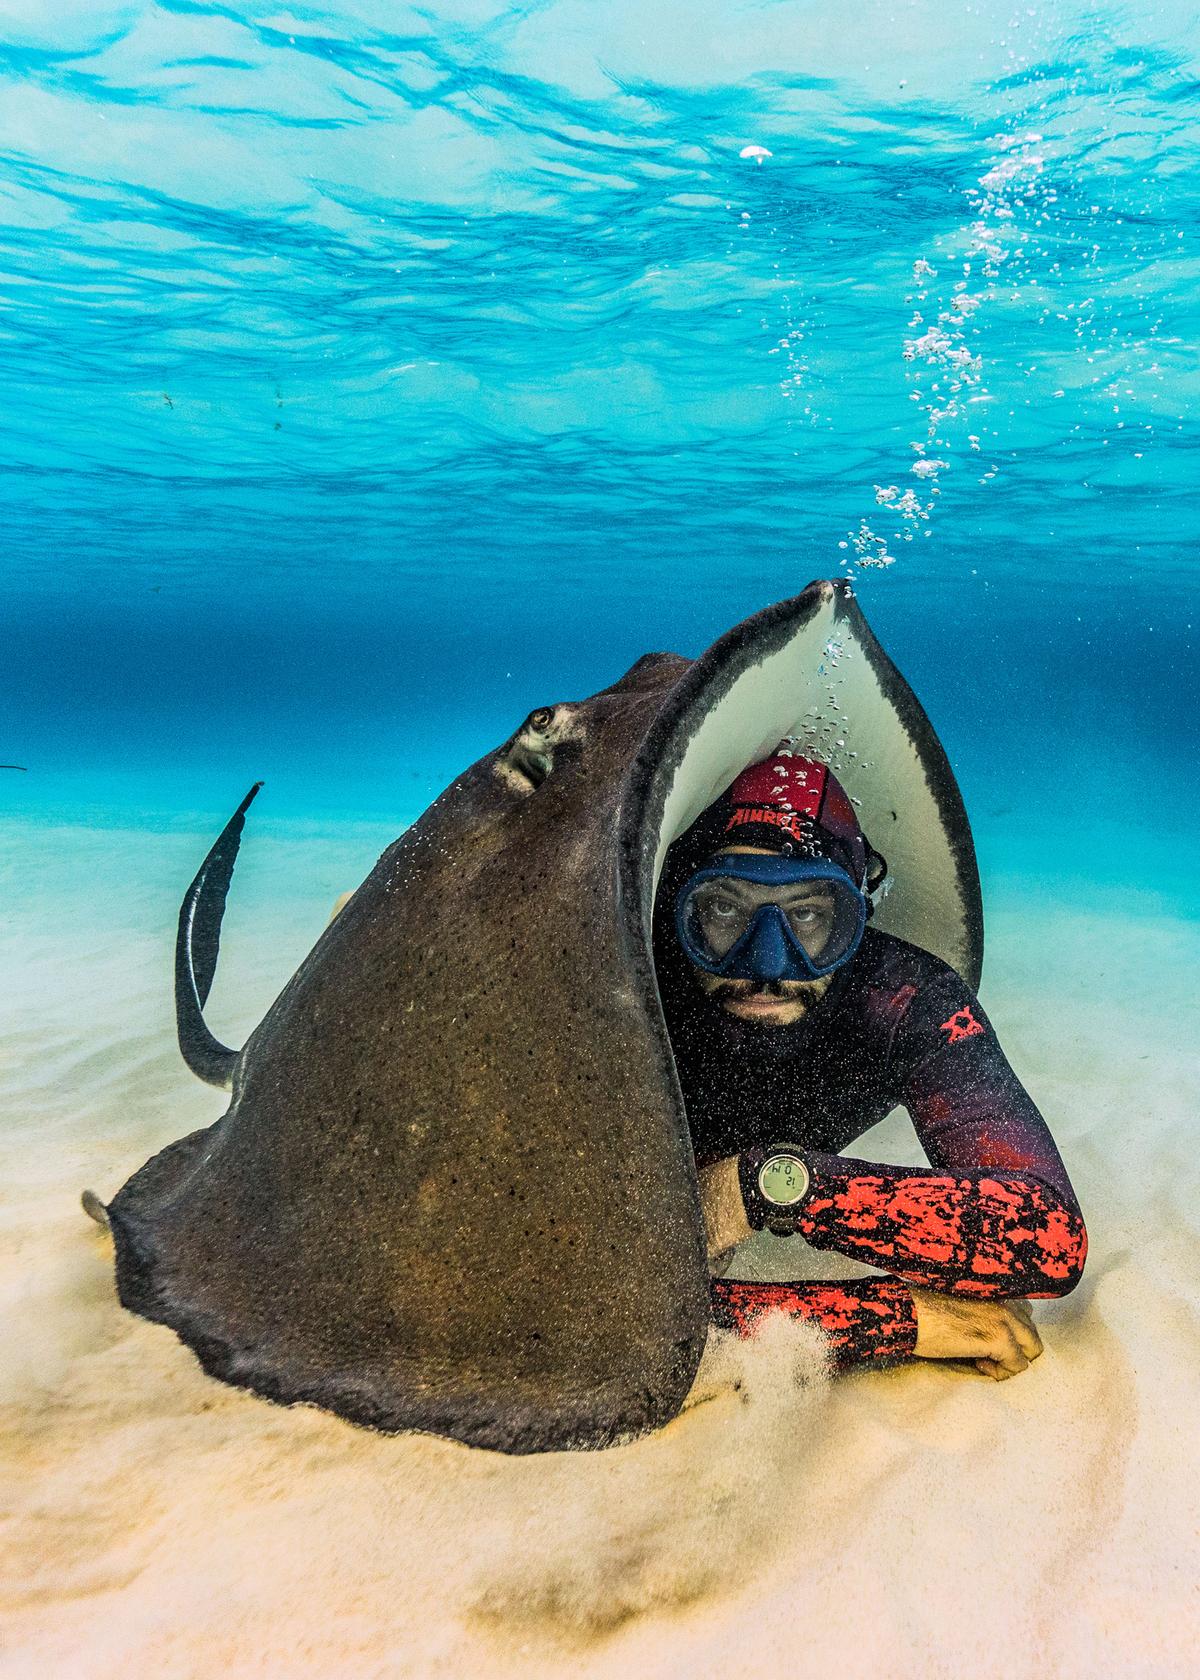 The stingray drops its wings down to the sand and envelopes Lebreux like a tent. (Caters News)